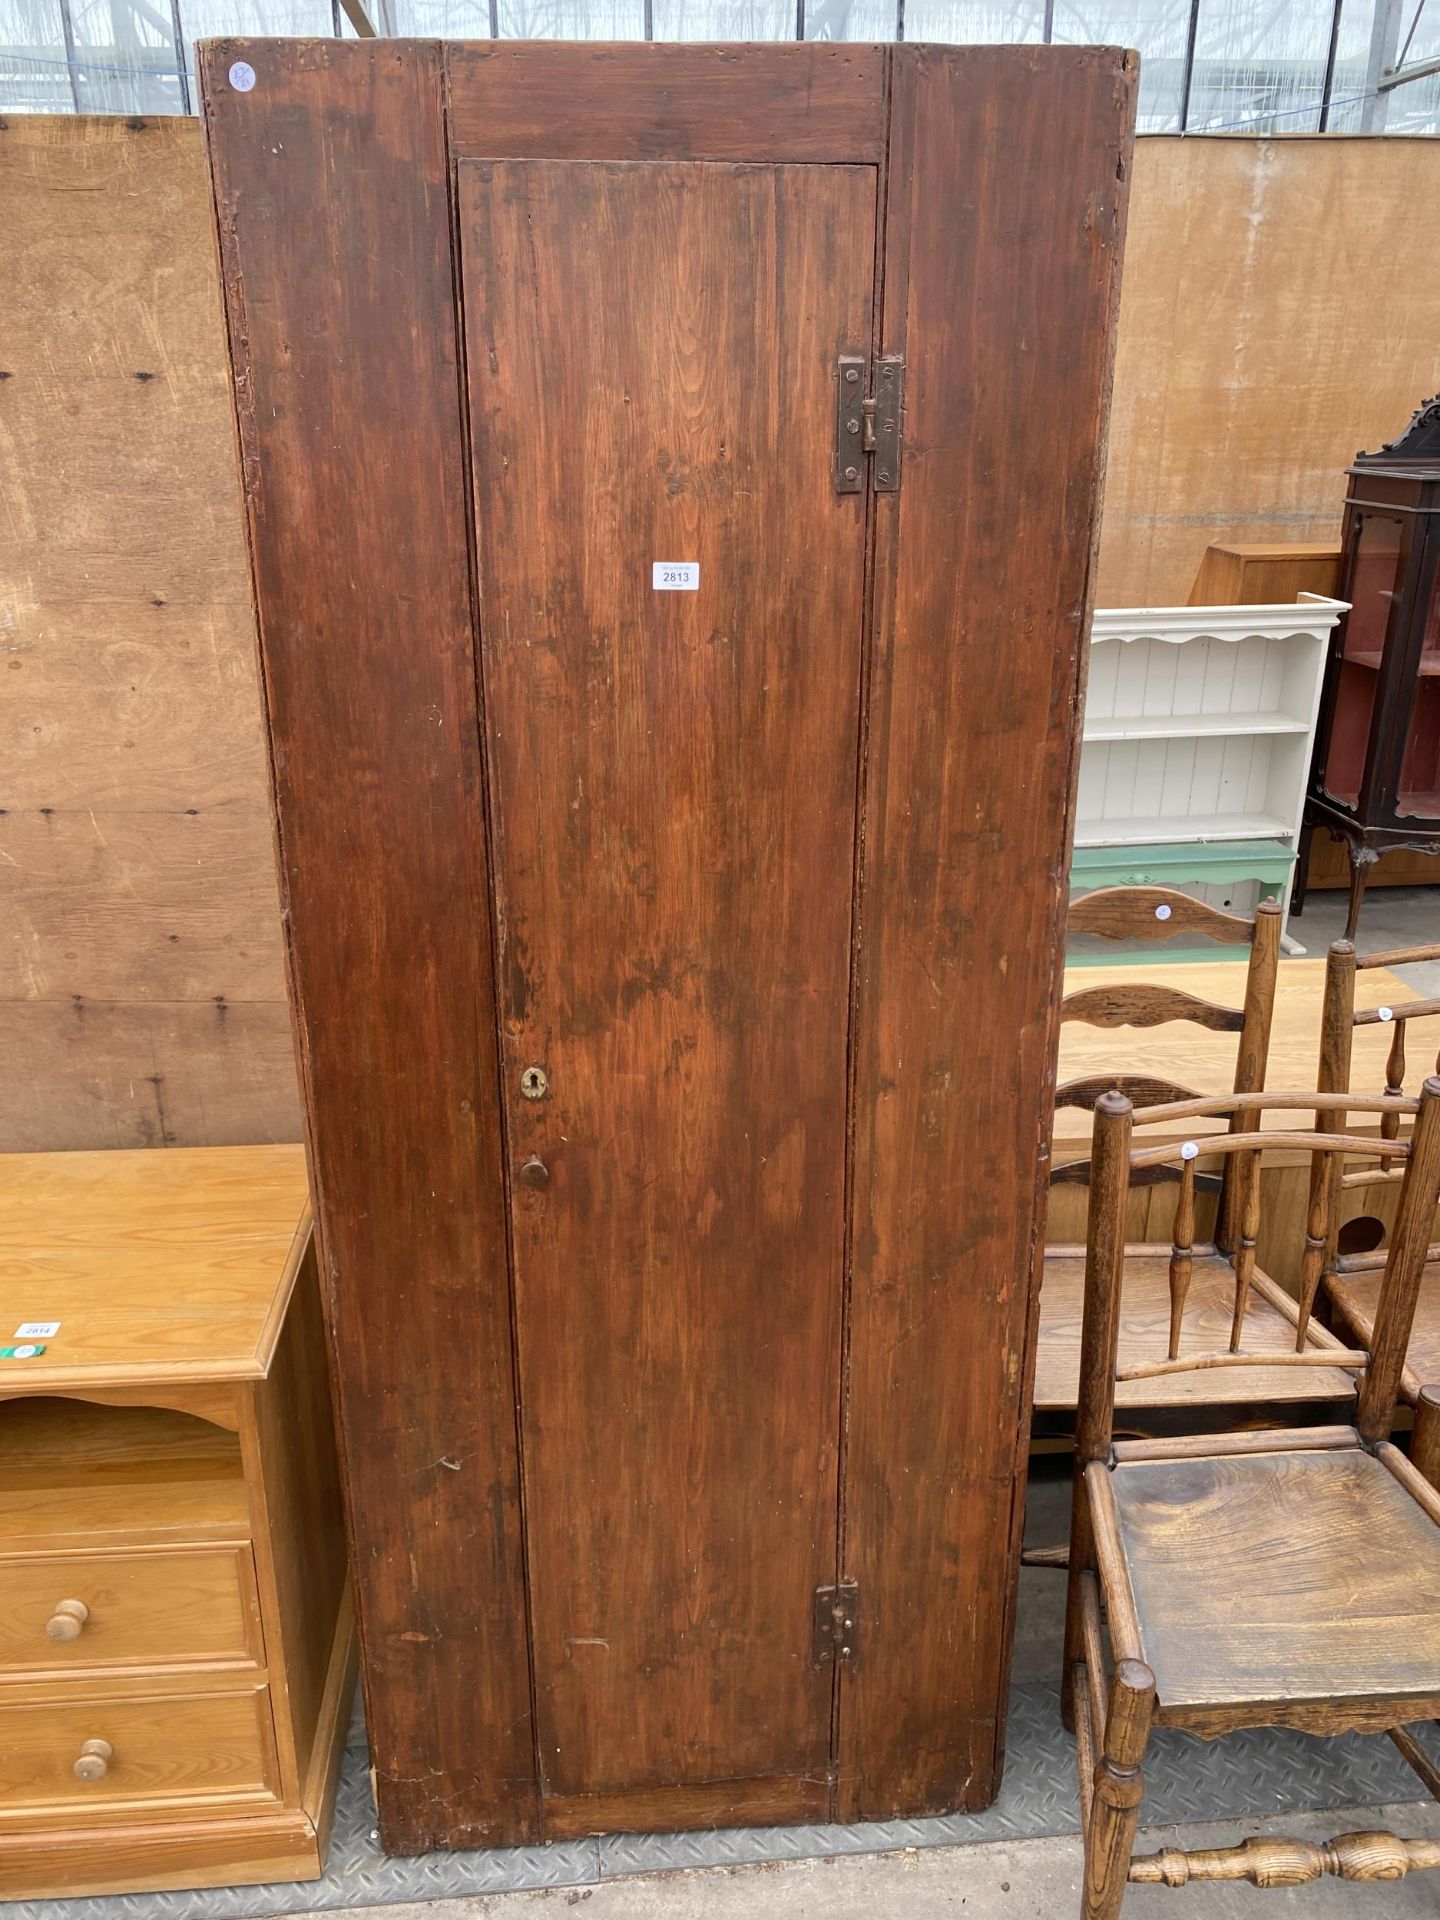 A 19TH CENTURY PAINTED CORNER CUPBOARD WITH H-HINGES, 28.5" WIDE